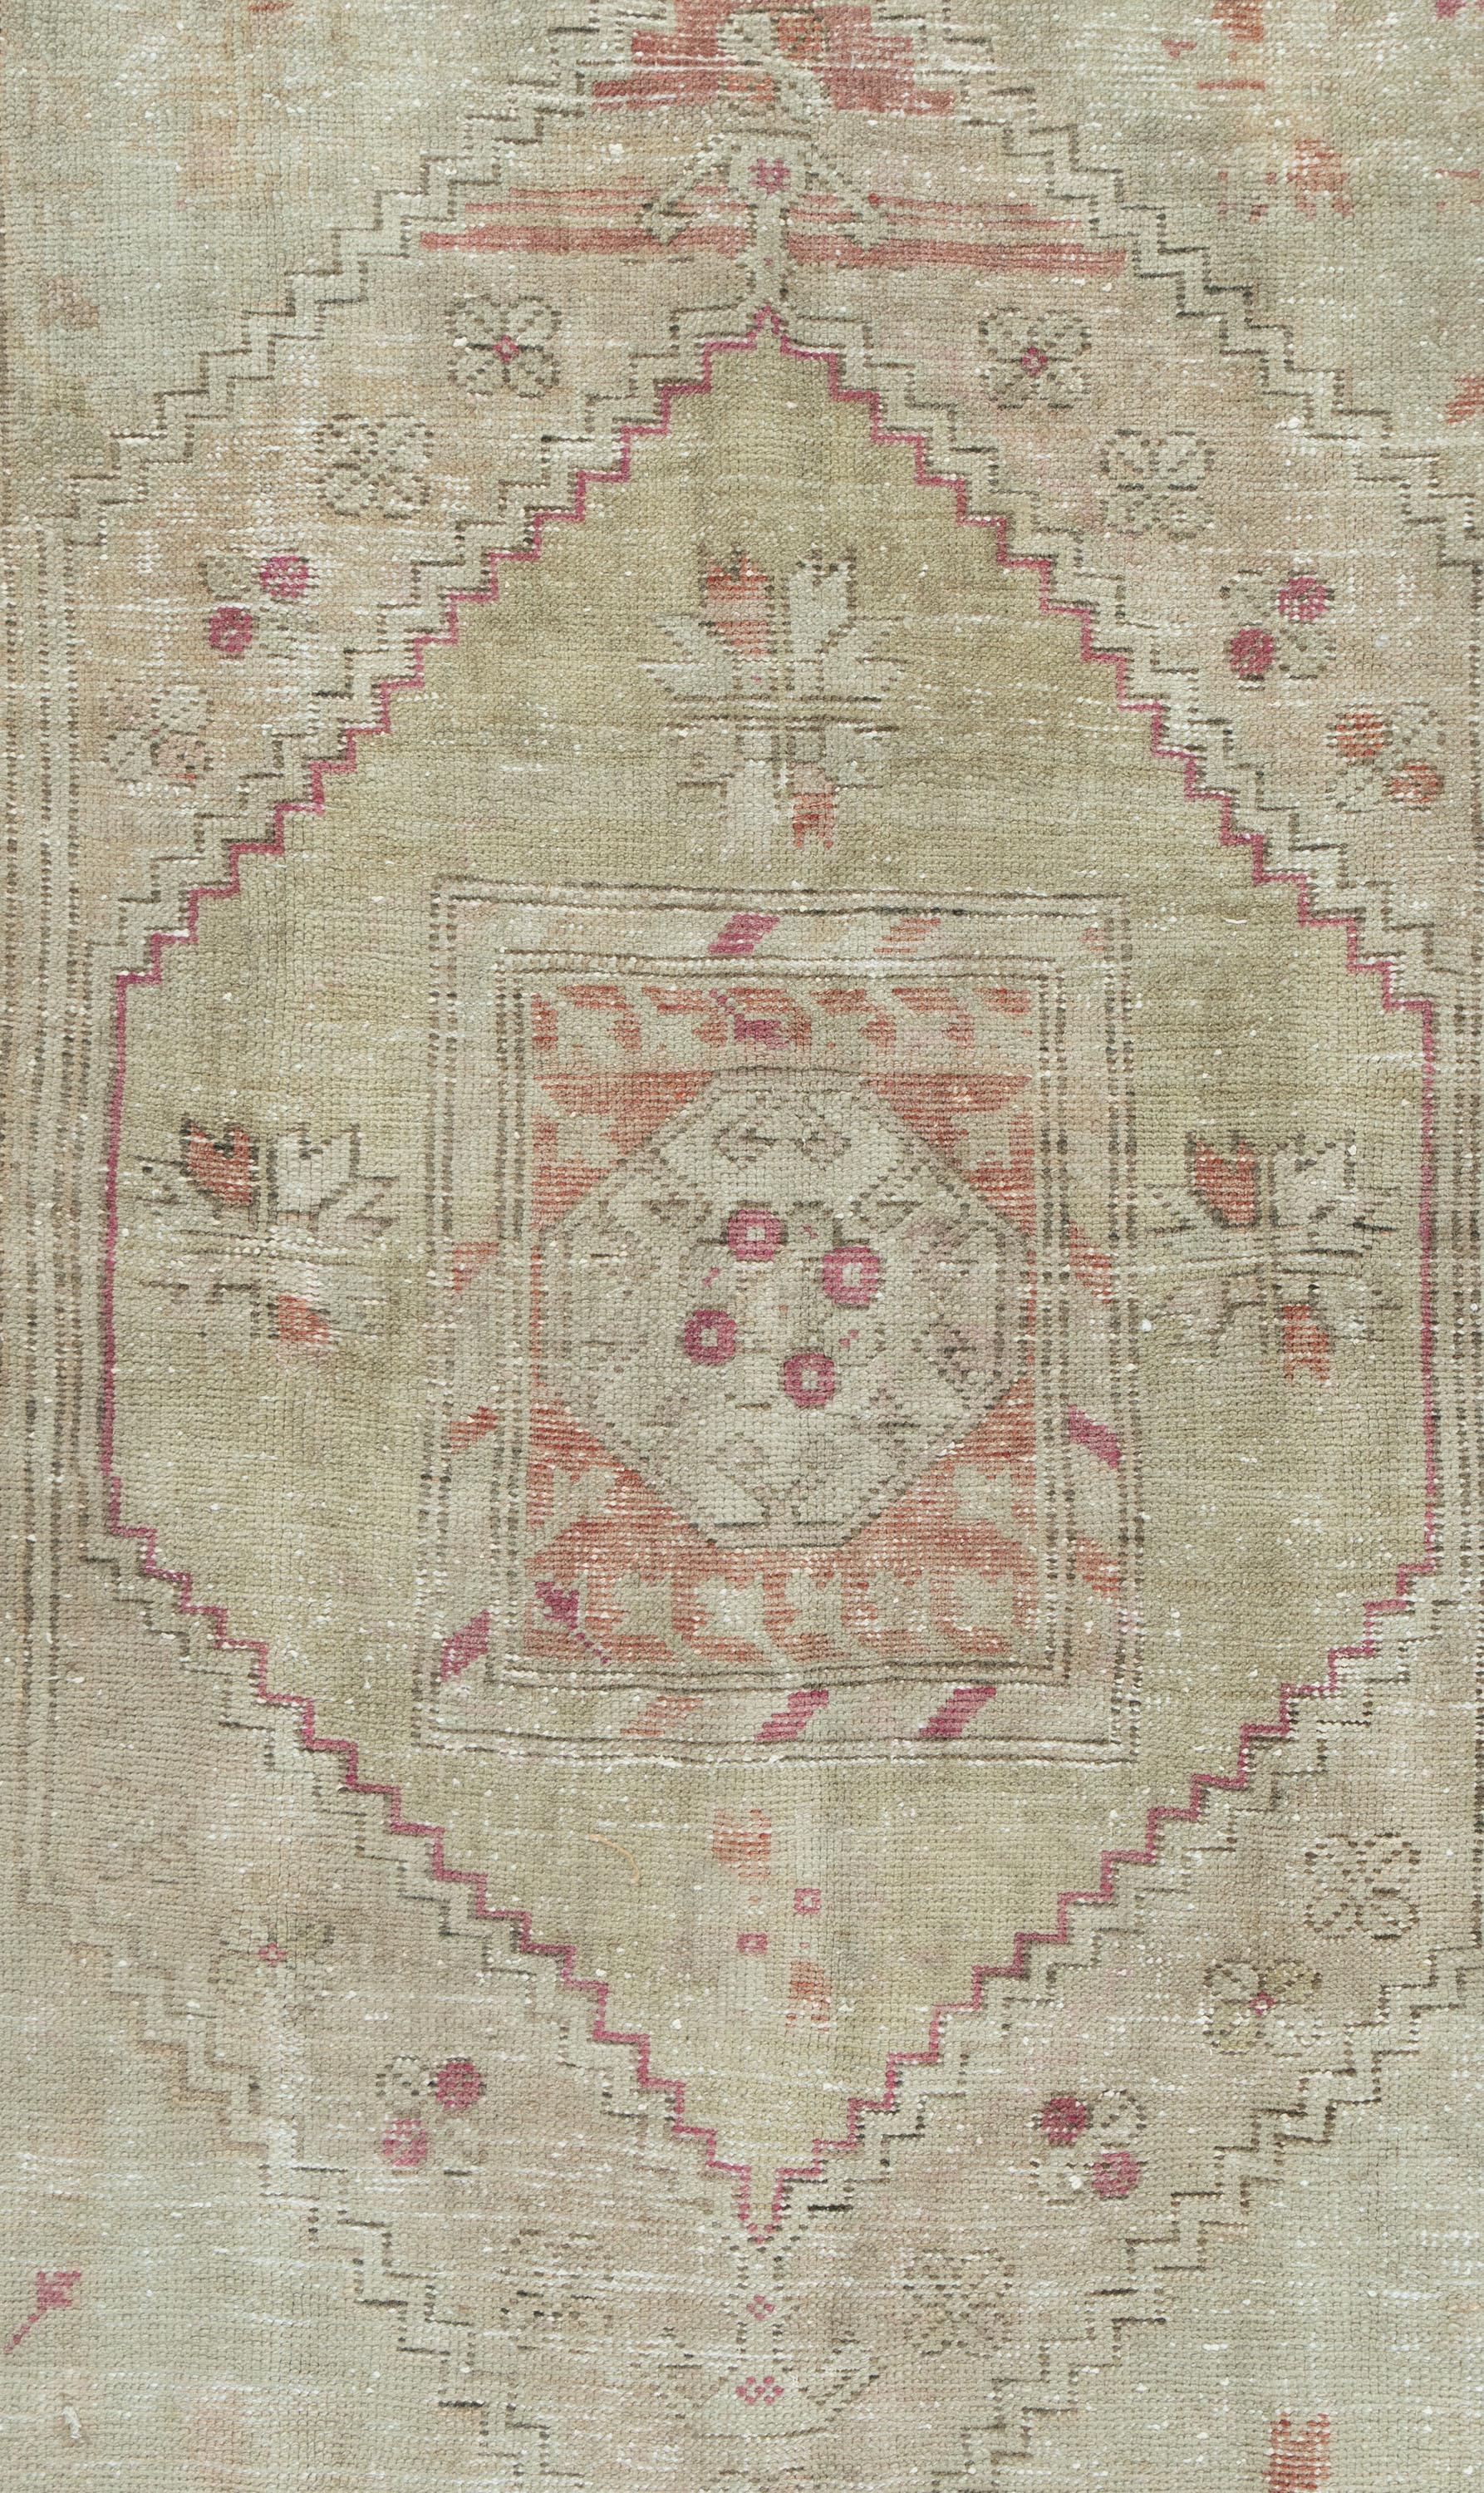 Vintage Lightly Distressed Turkish Anatolian Rug 5'4 x 8'1.  Character, tradition, pattern and palette converge in this gorgeous vintage hand knotted Turkish rug, woven in the small west-central Anatolian region. The rug-weaving is in west-central